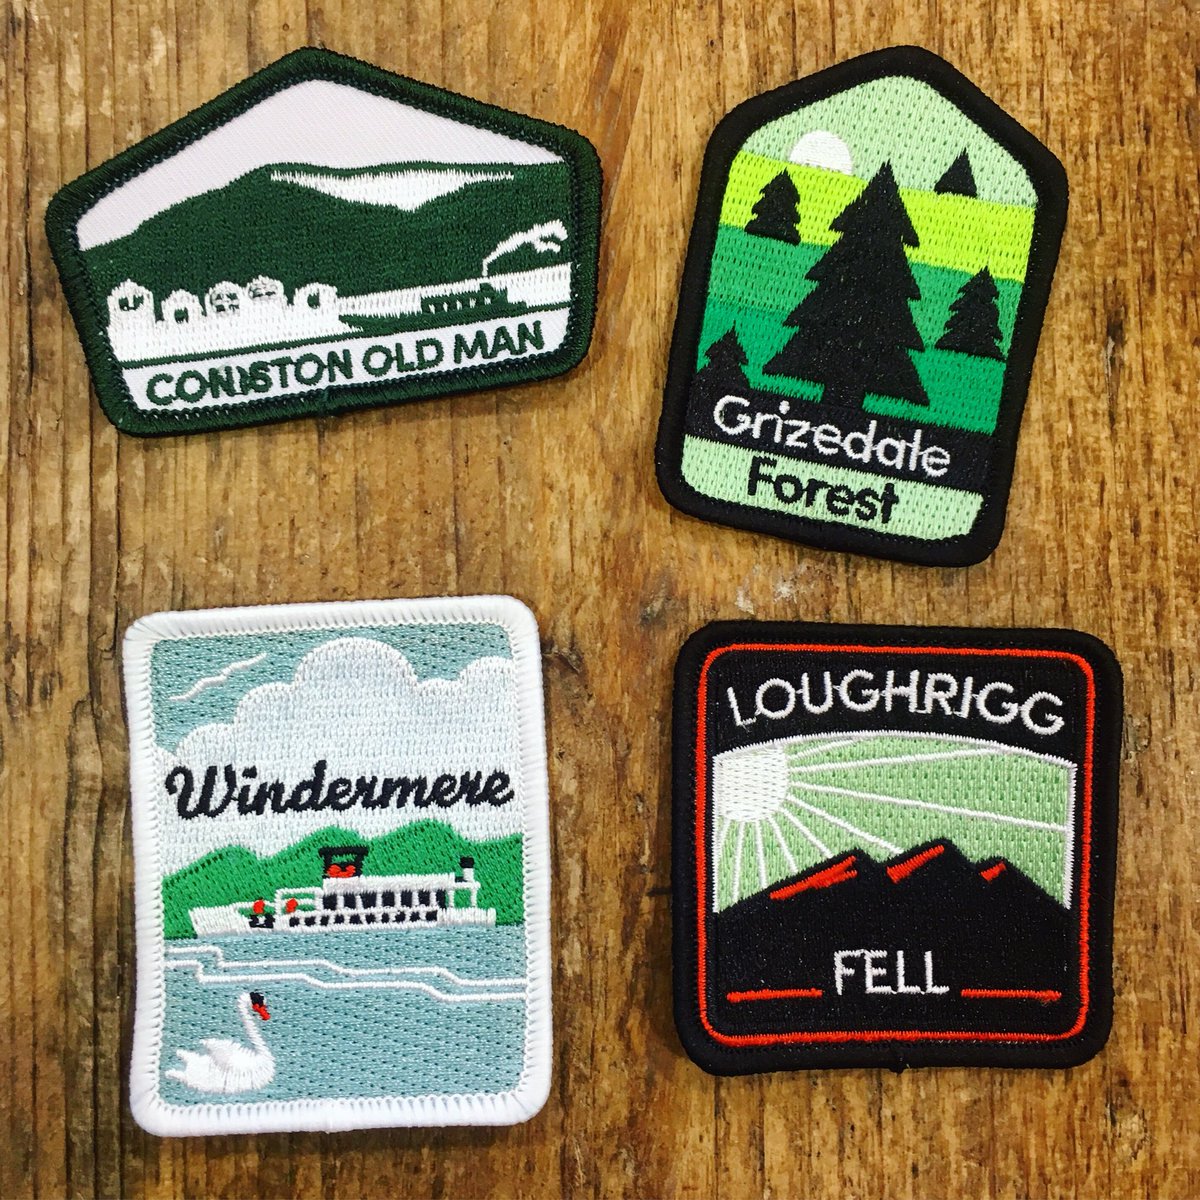 Check out what has just arrived at #CherrydidiAmbleside today! New patches from @ConquerLake .... come get yours and add to your collection!
#windermere #loughriggfell #conistonoldman #grizedaleforest #patches
@LakesPound @LiveShopLocal @LoveAmbleside @handmadebritain